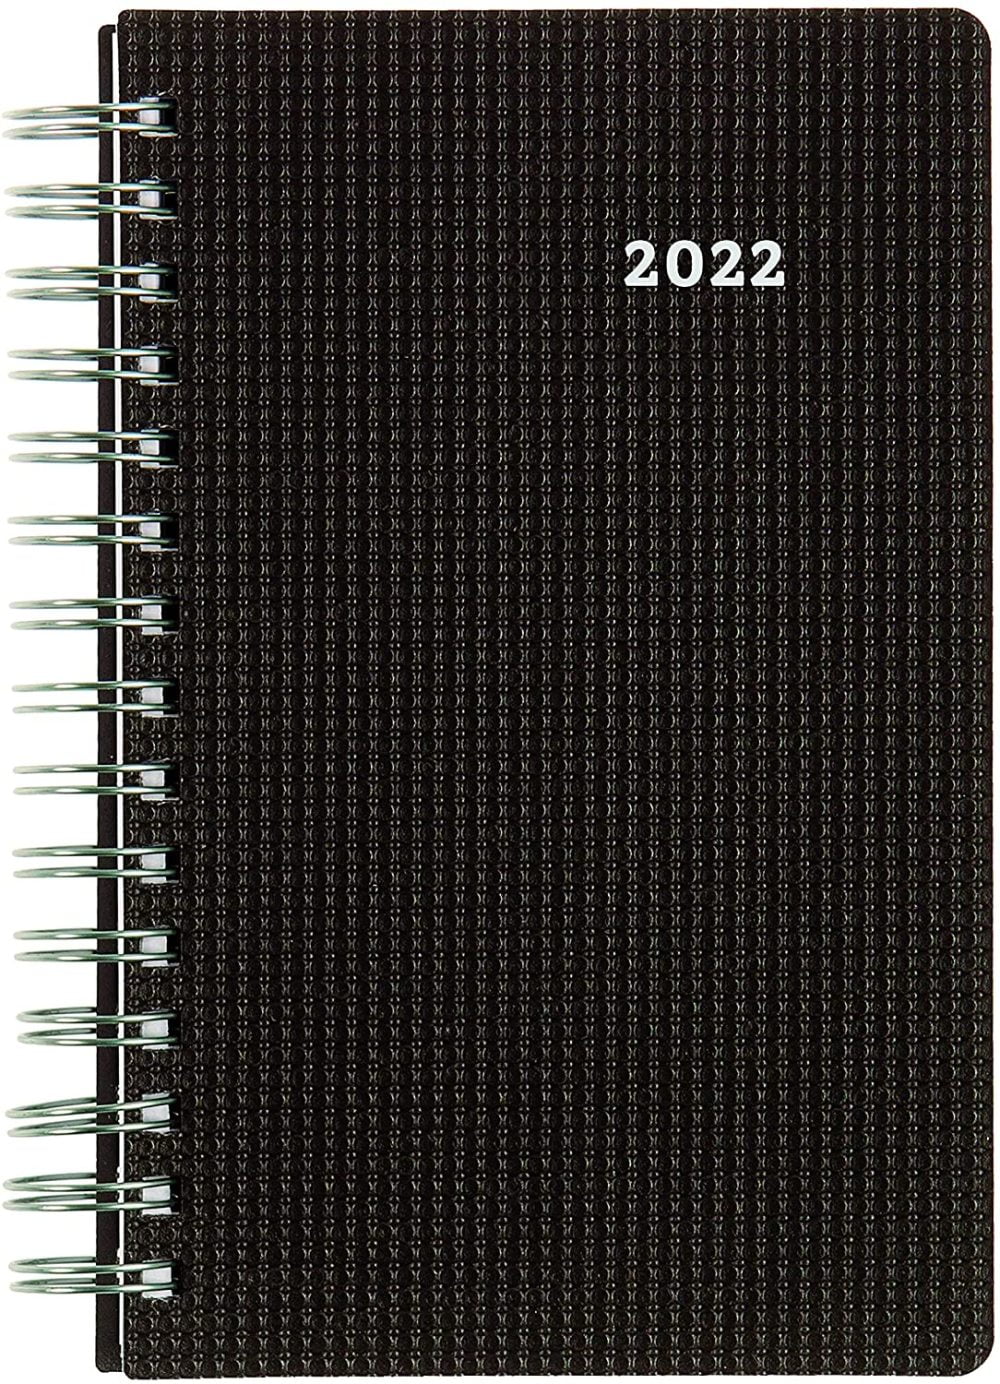 Appointment Book 12 Months January to December Twin-Wire Binding CB634V.AA-22 8 x 5 Brownline 2022 DuraFlex Daily/Monthly Planner Aqua 